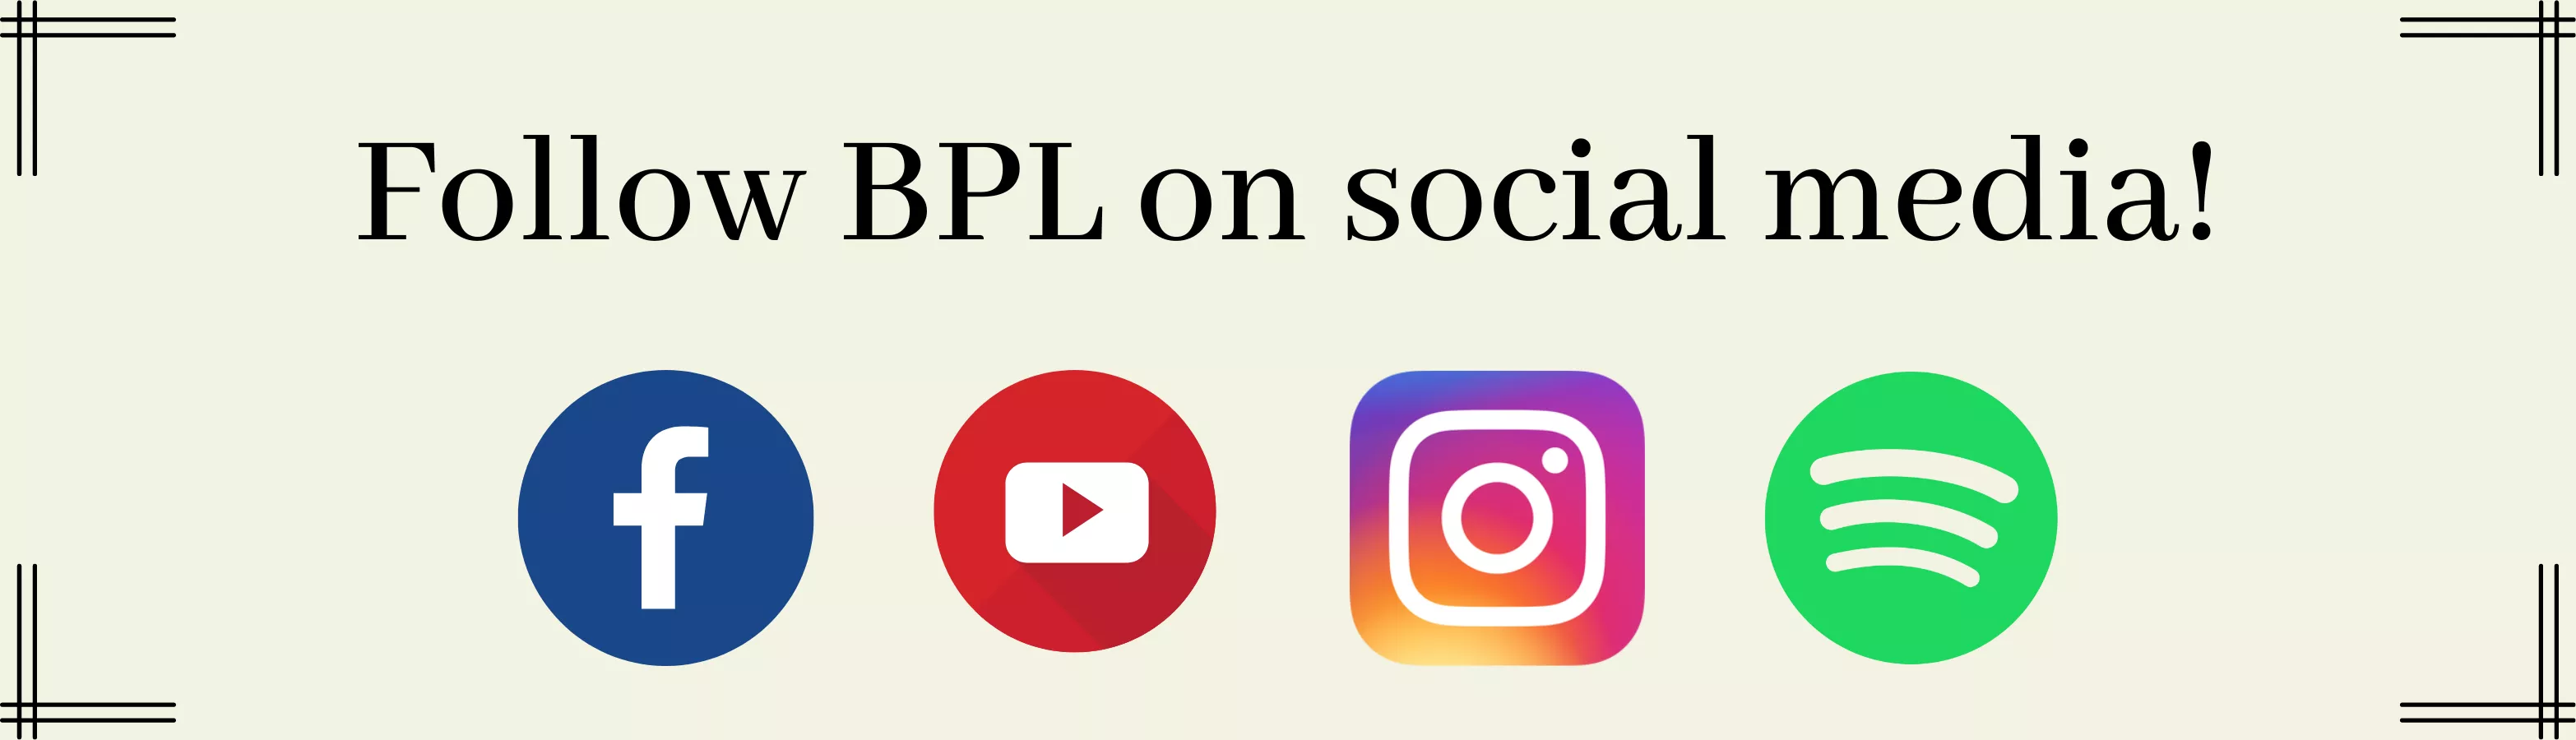 a creambackground with the logos for facebook, youtube, spotify, and instagram, and the text Follow BPL on Social Media